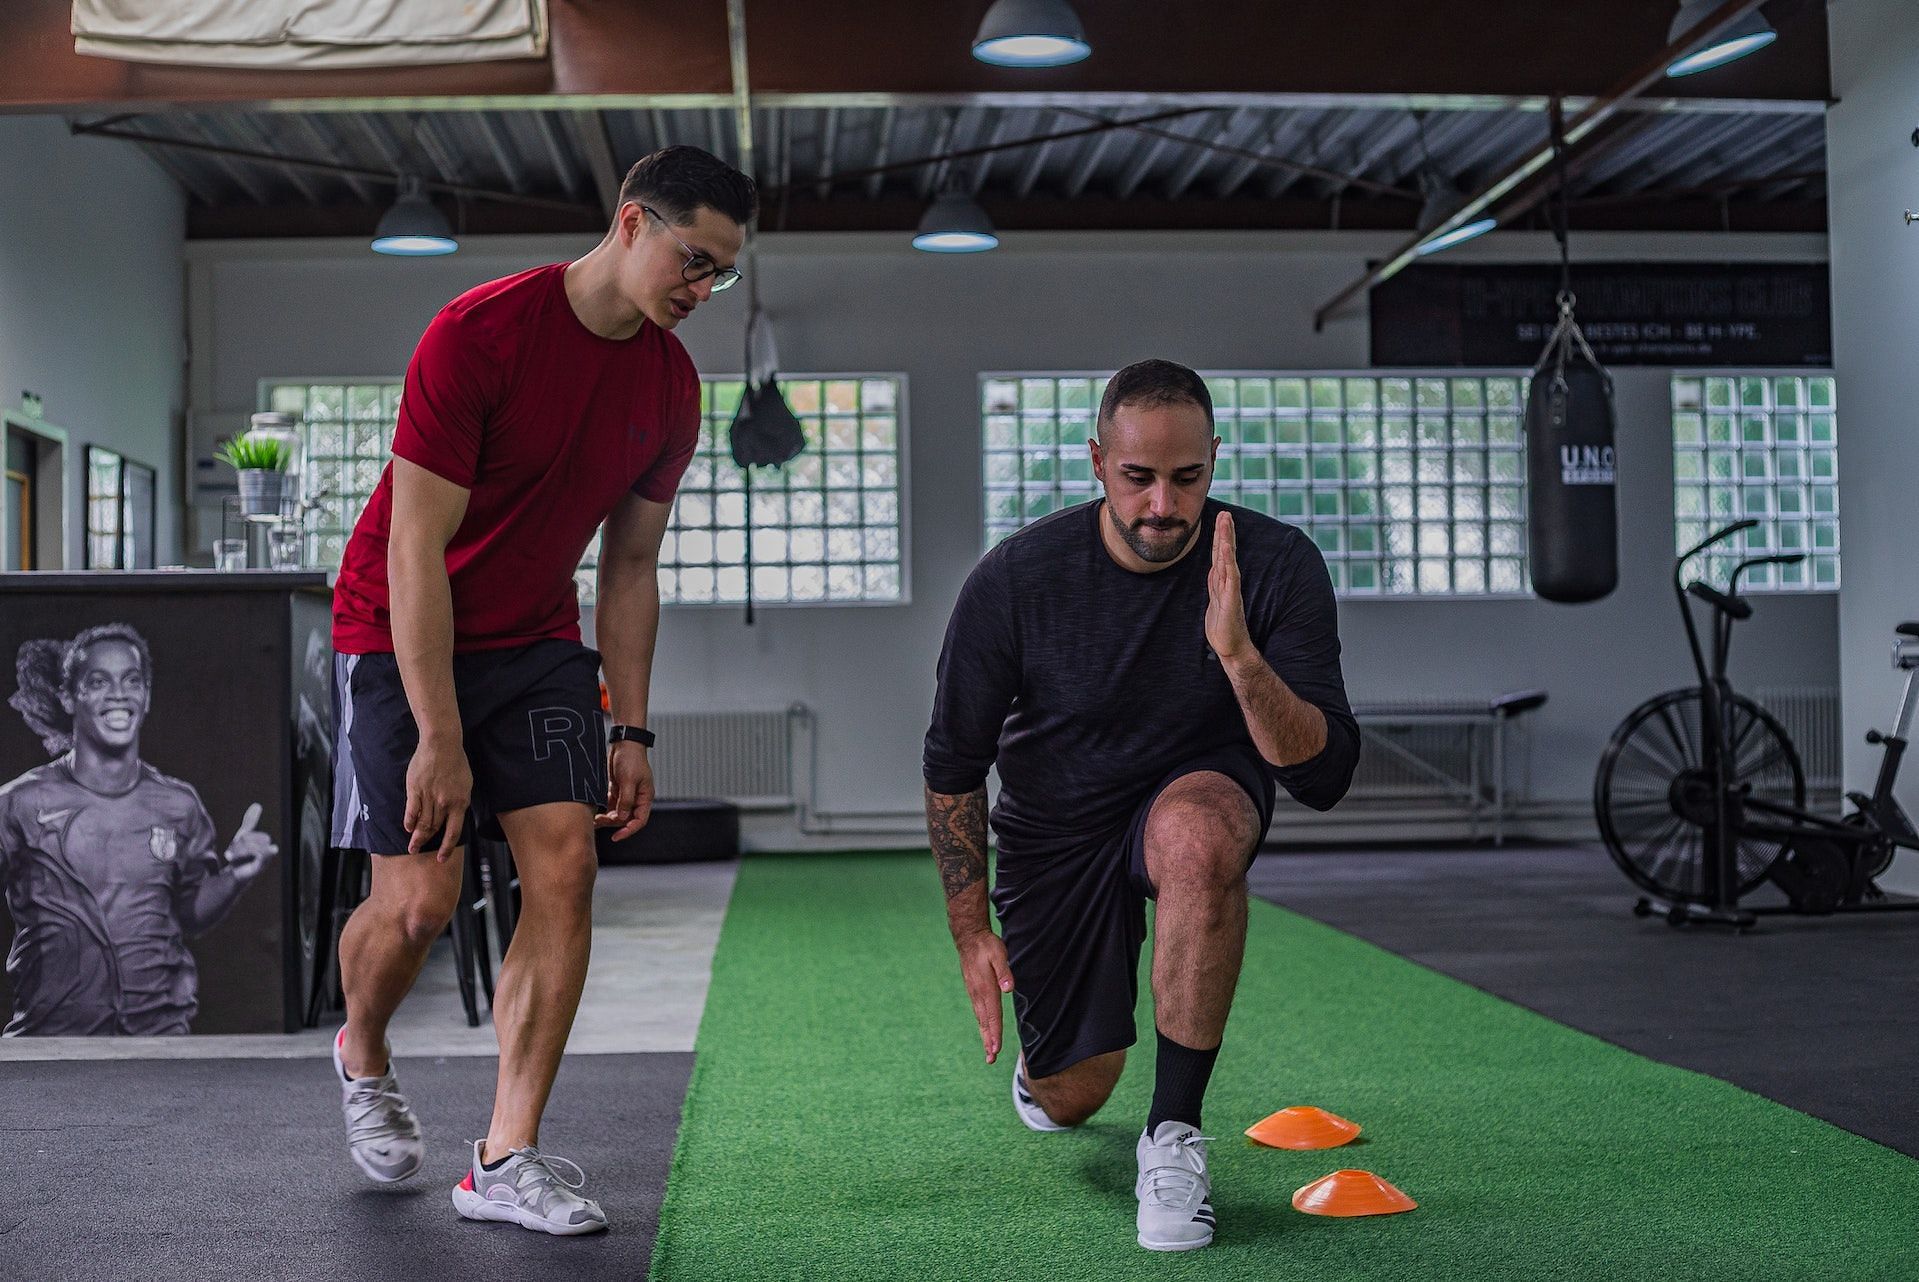 No-equipment leg exercises are as effective as the weighted ones. (Photo via Pexels/Justin Luck)